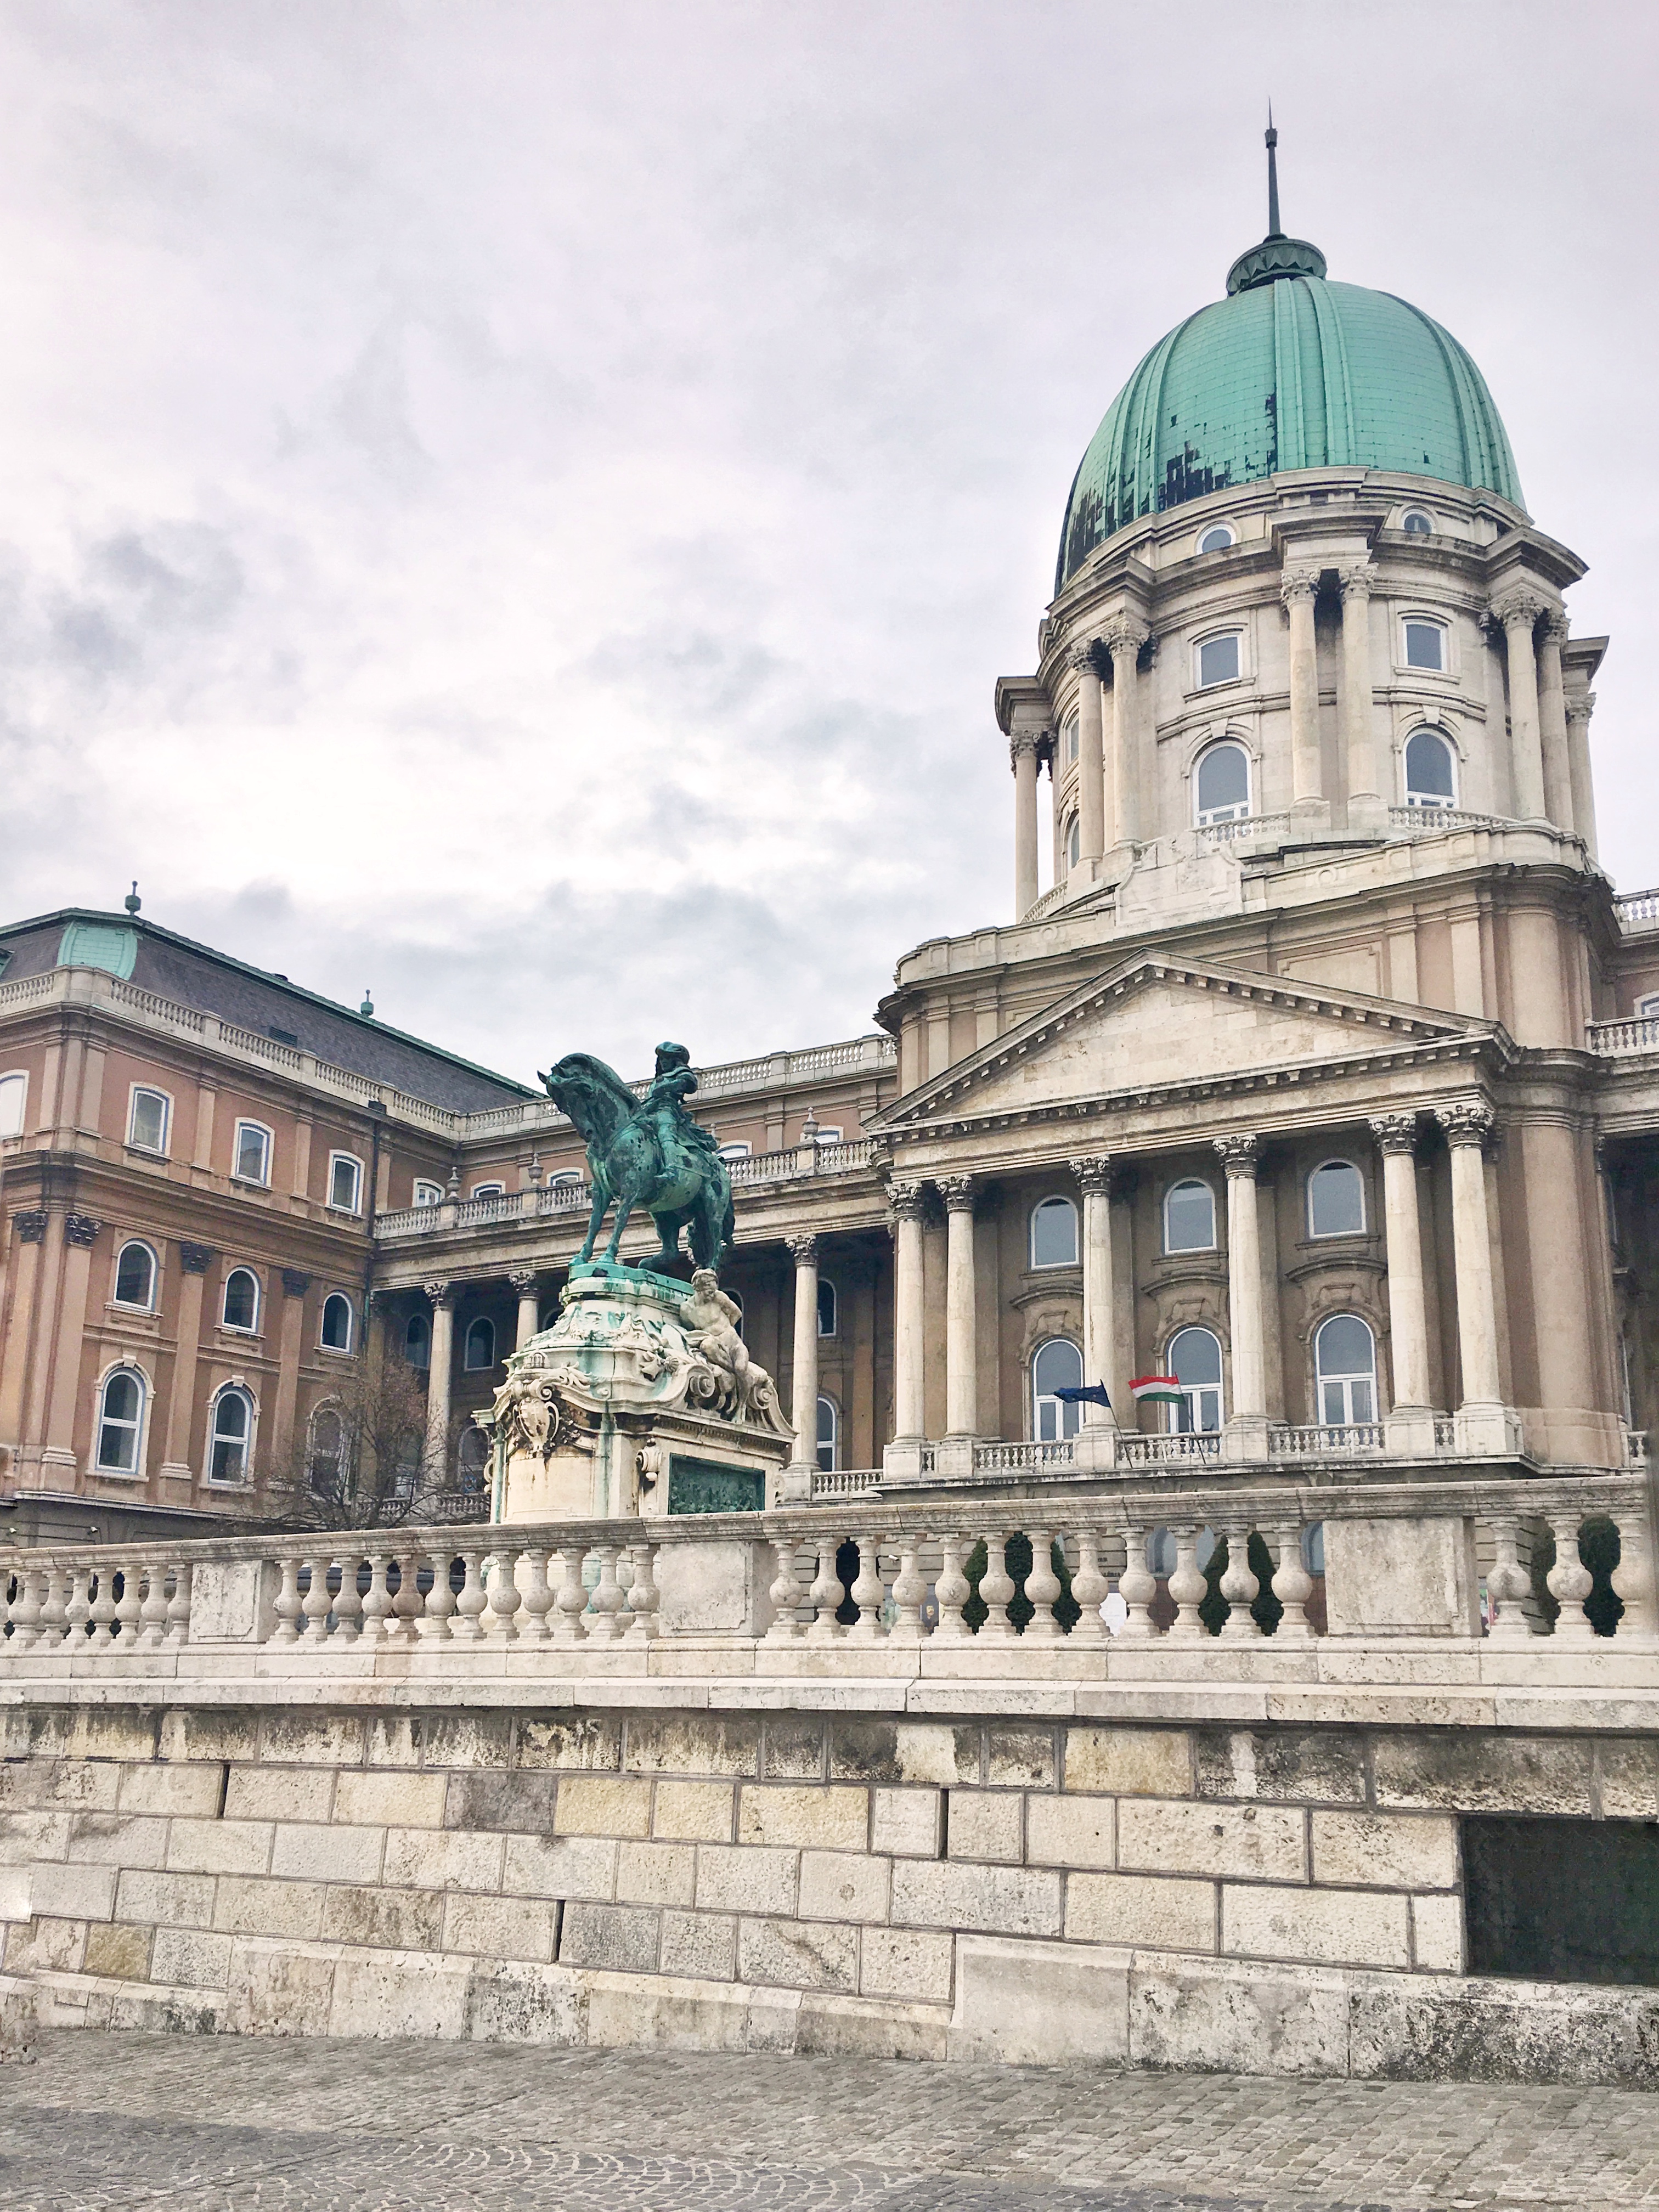 Majestic buildings in Vienna